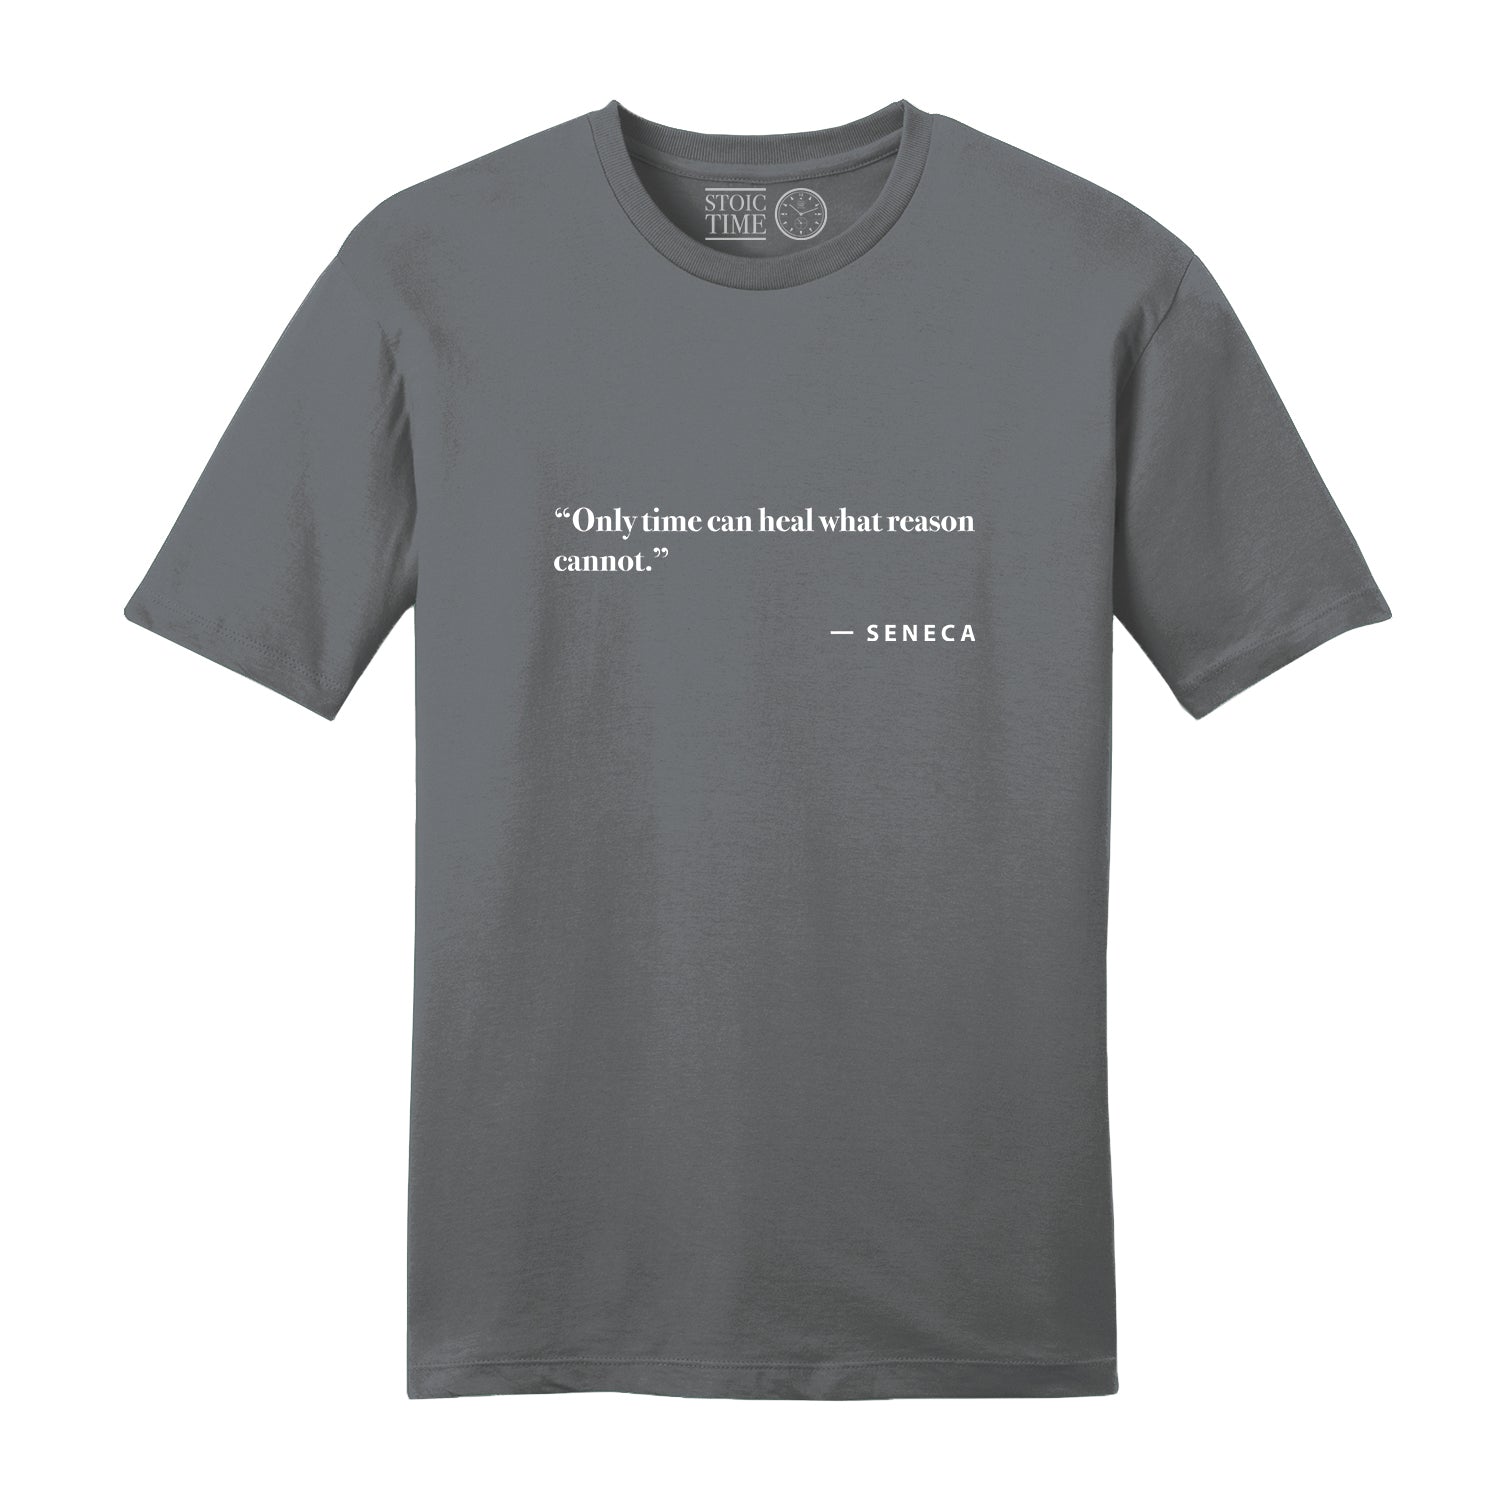 Seneca Men's Tshirt - Only Time Can Heal